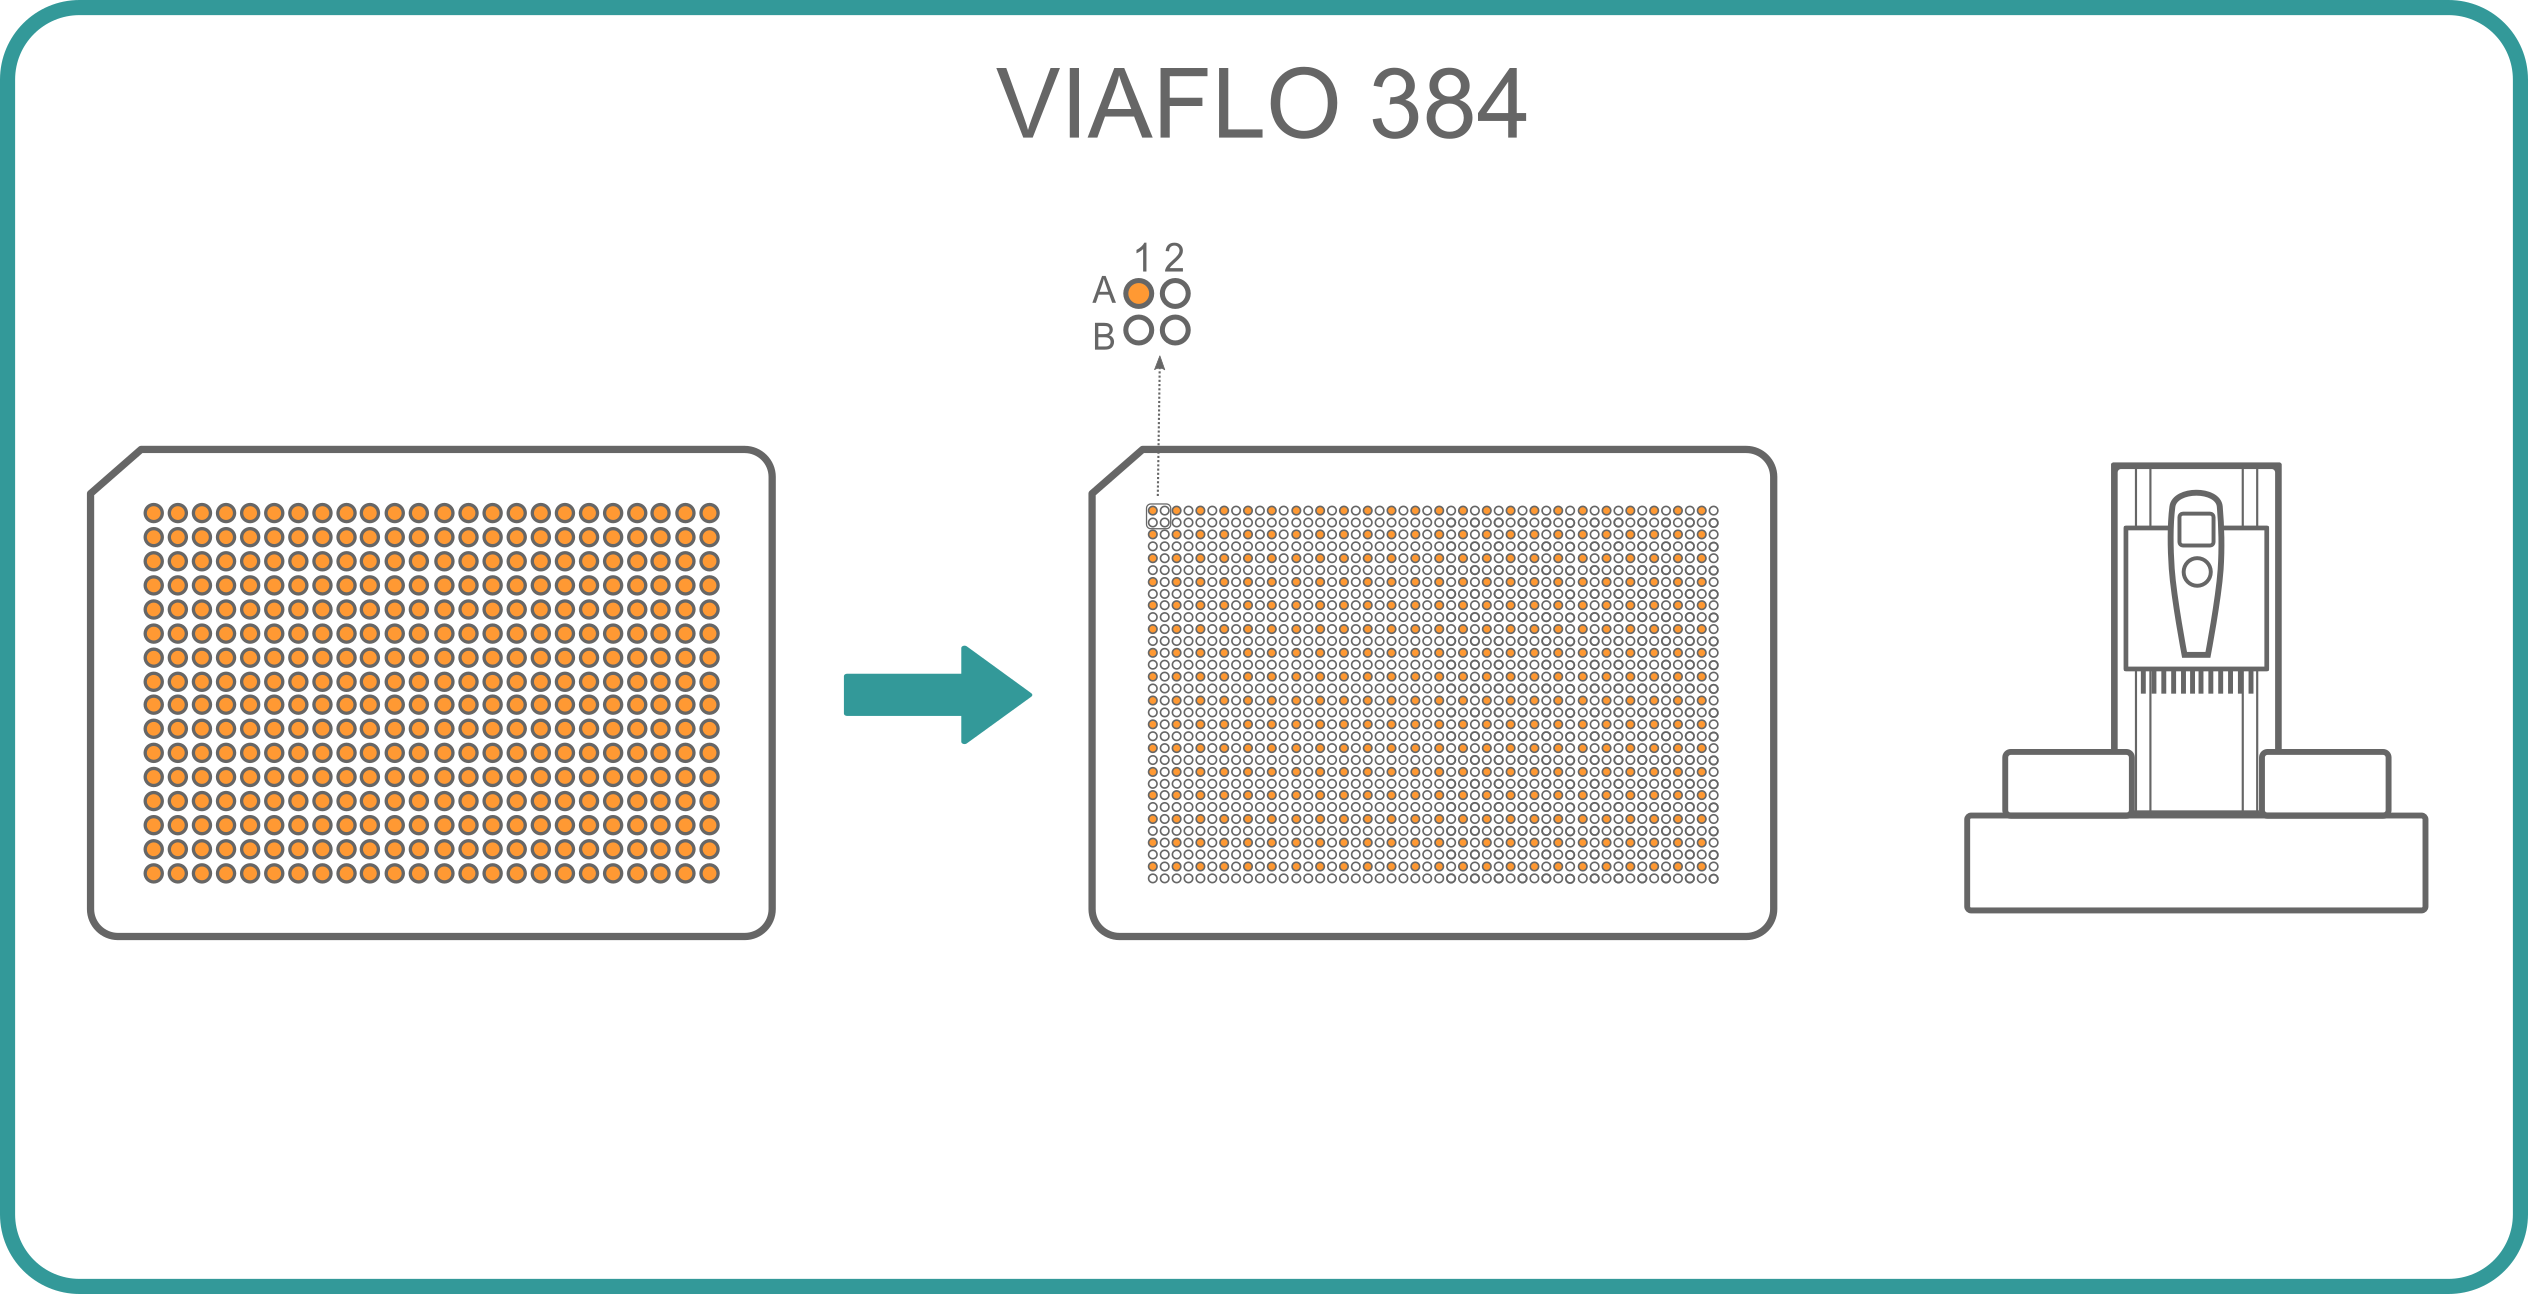 Infographic showing sample transfer from a 384 well plate to a 1536 well plate with INTEGRA's VIAFLO 384 handheld electronic pipette.